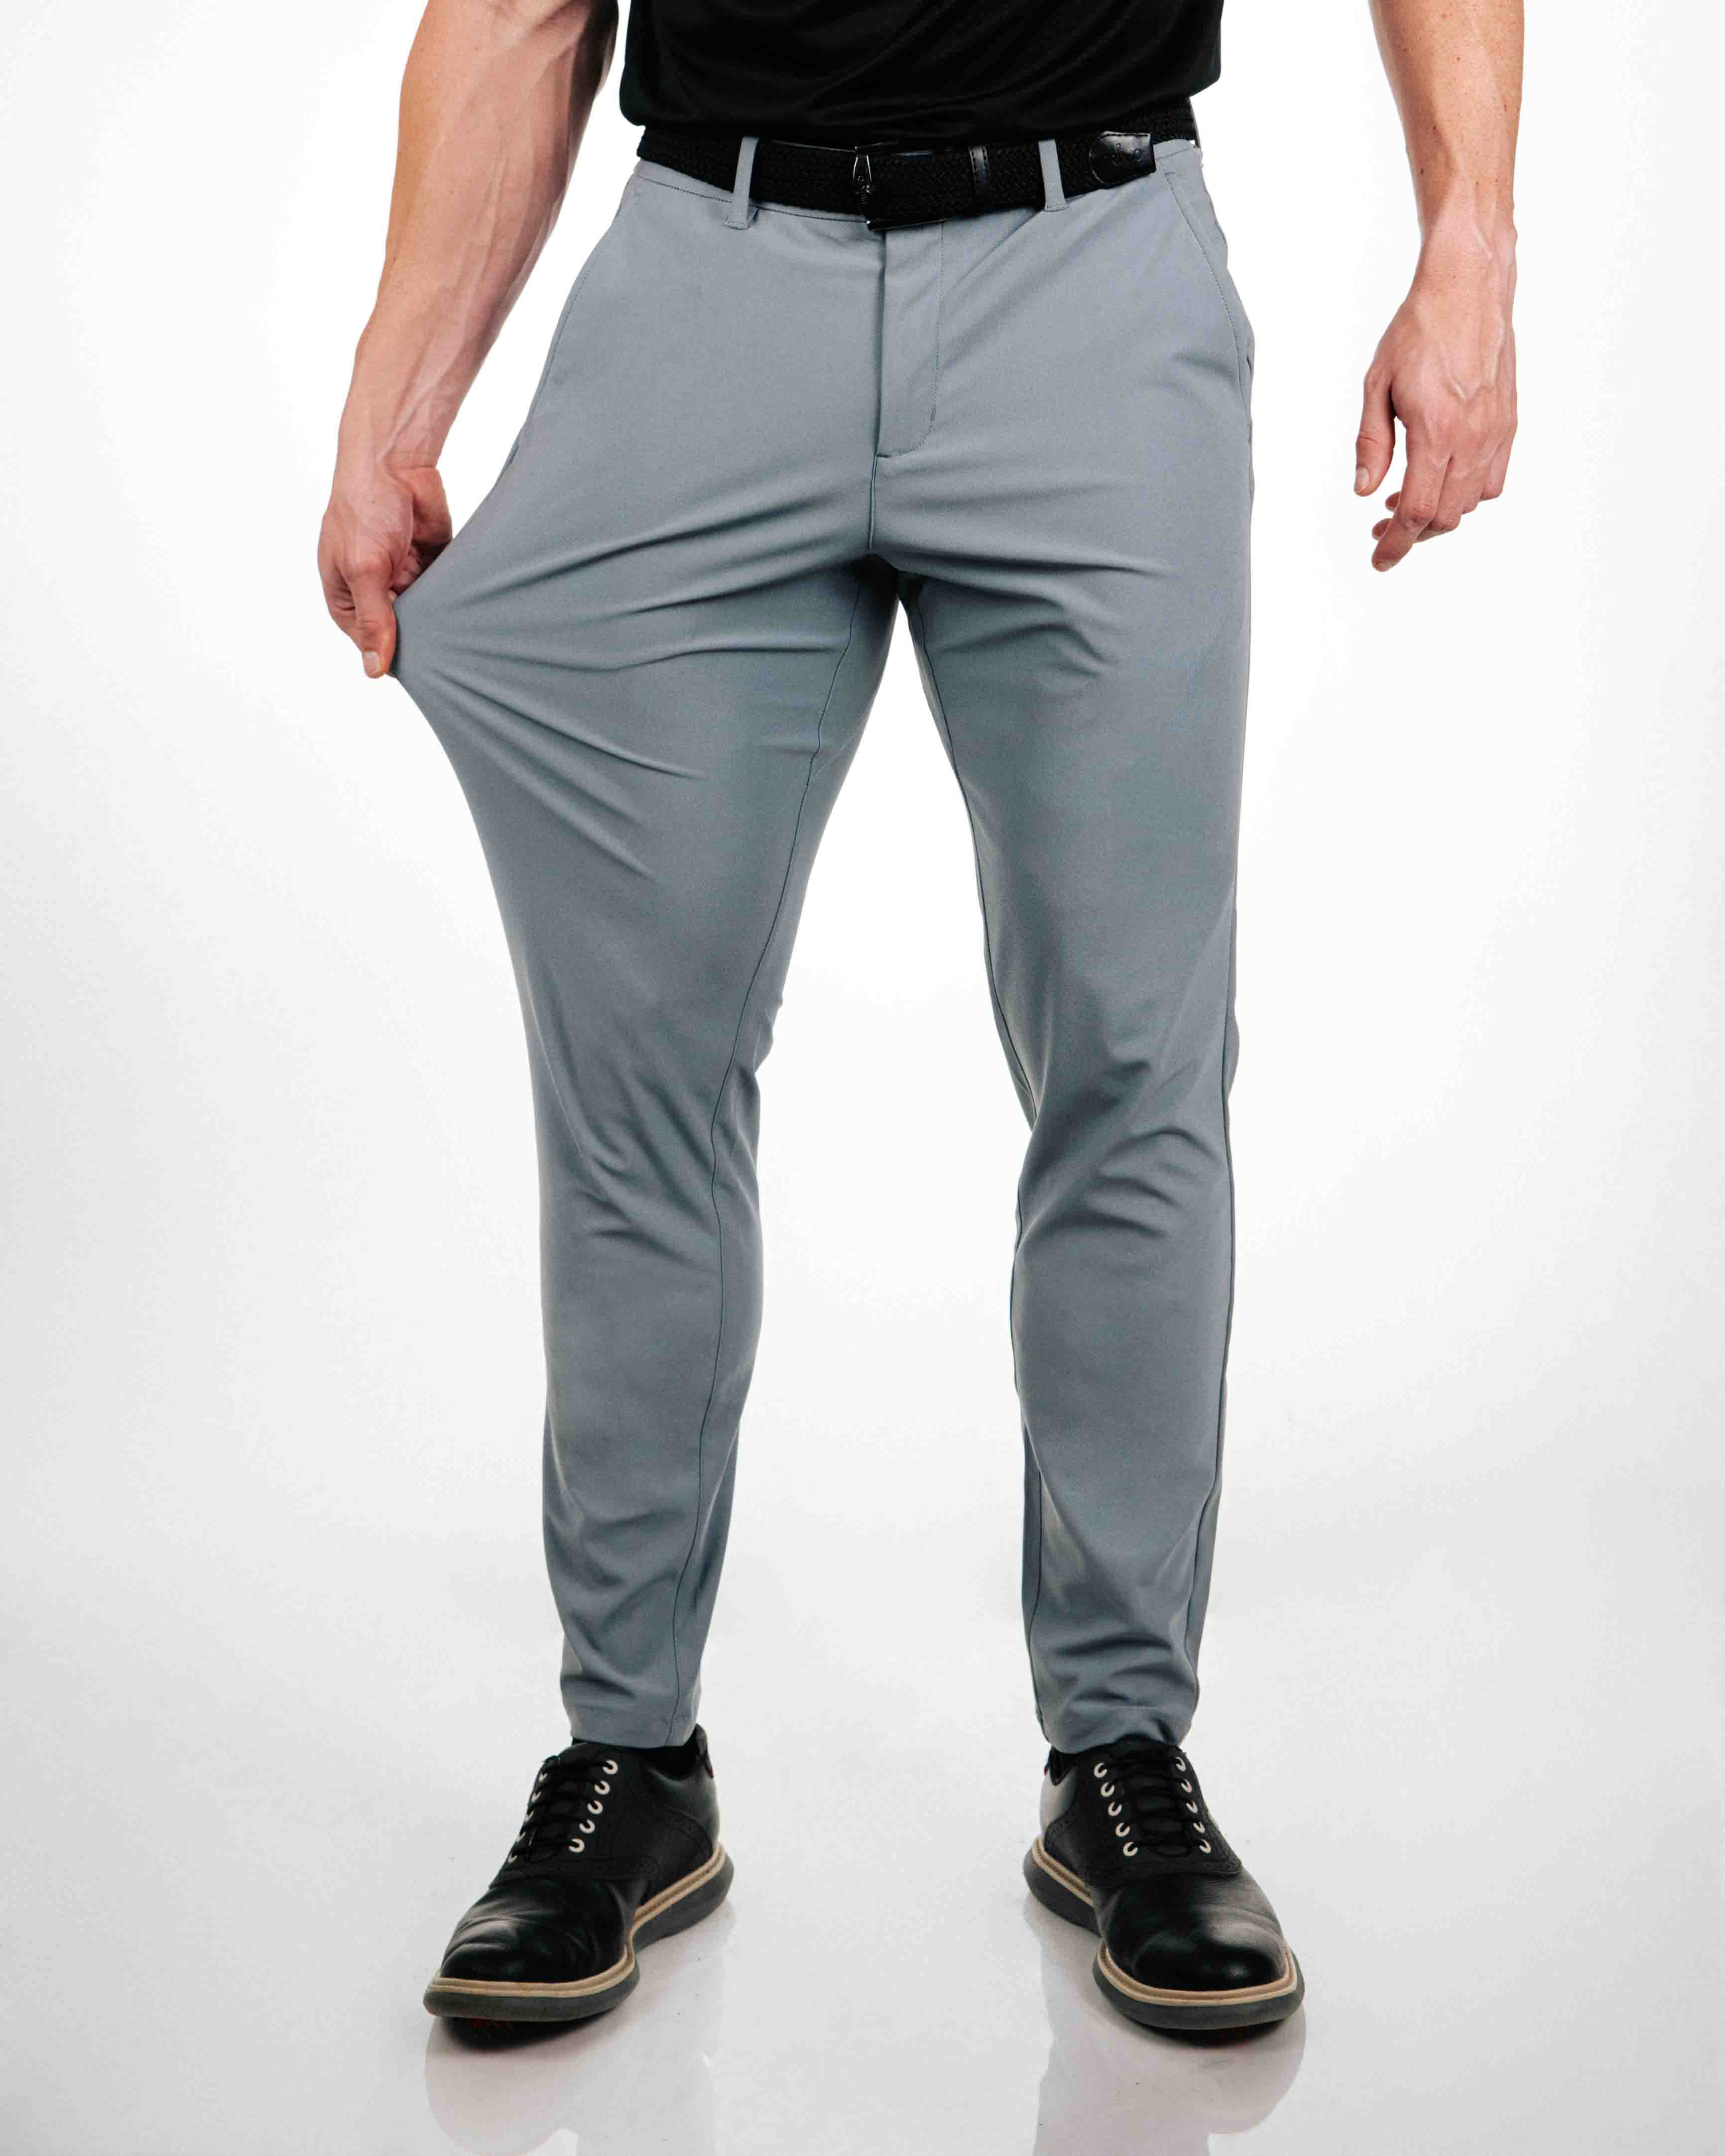 Buy Light Gray Solid Cotton Belt Pant for Best Price, Reviews, Free Shipping